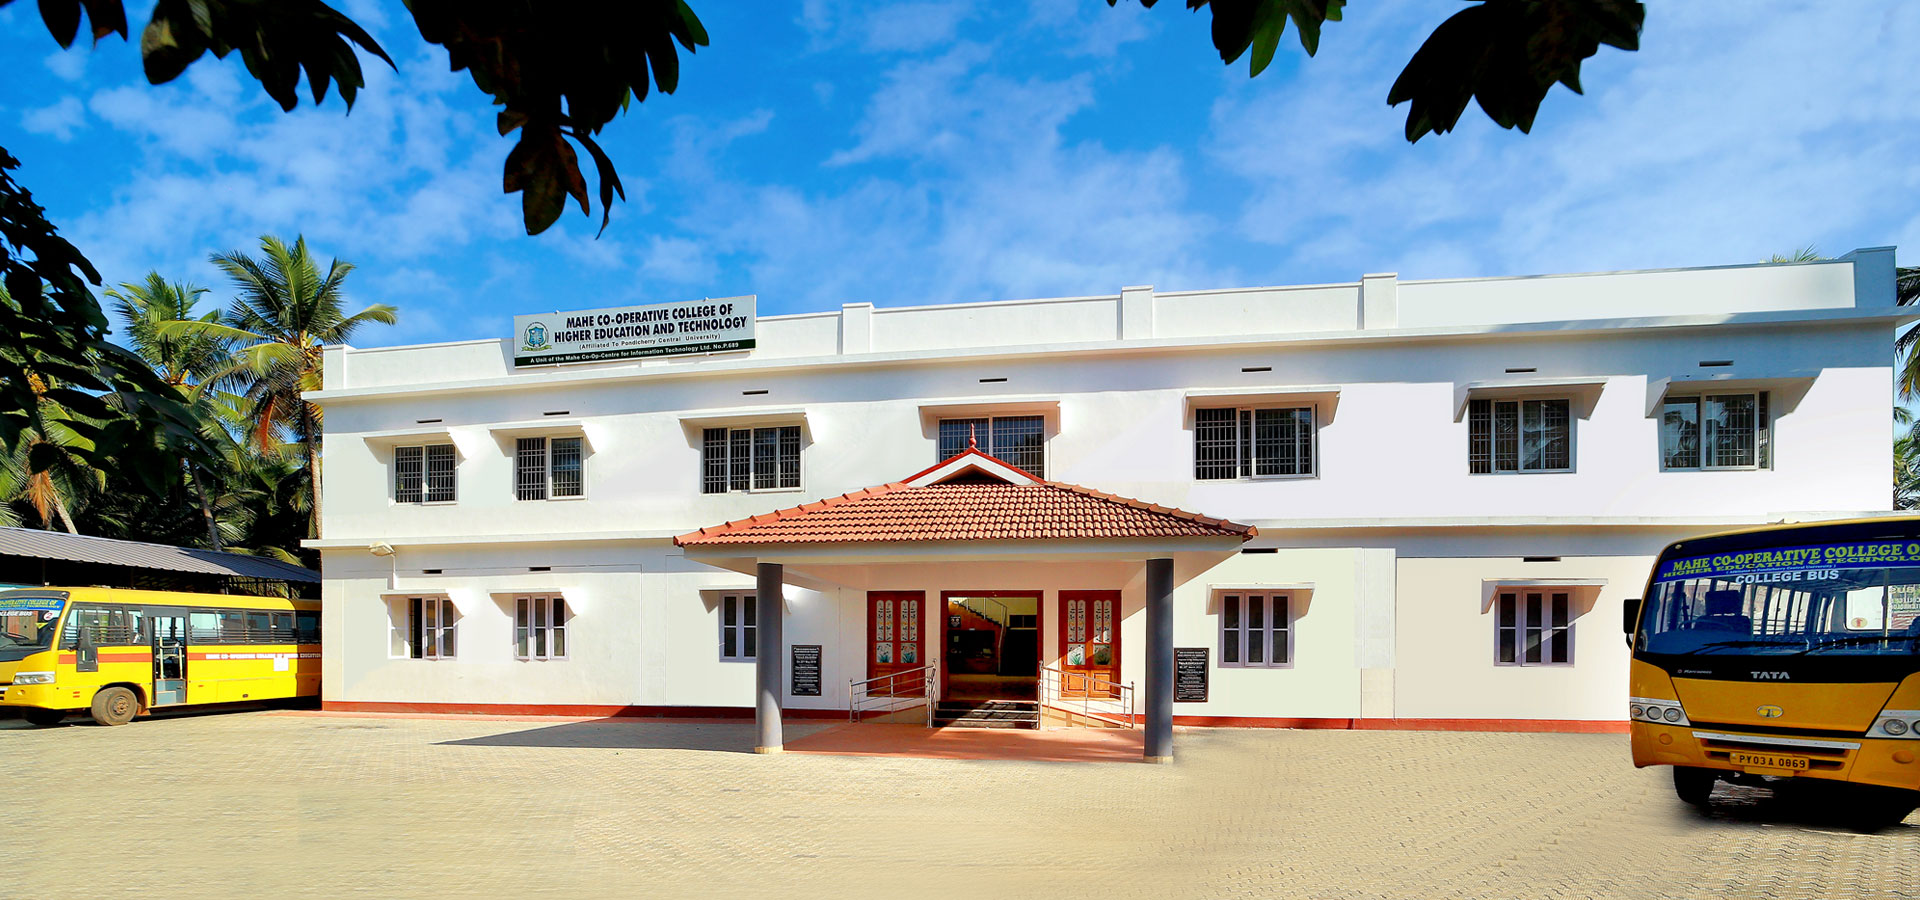 Mahe Co-Operative College of Higher Education and Technology Image